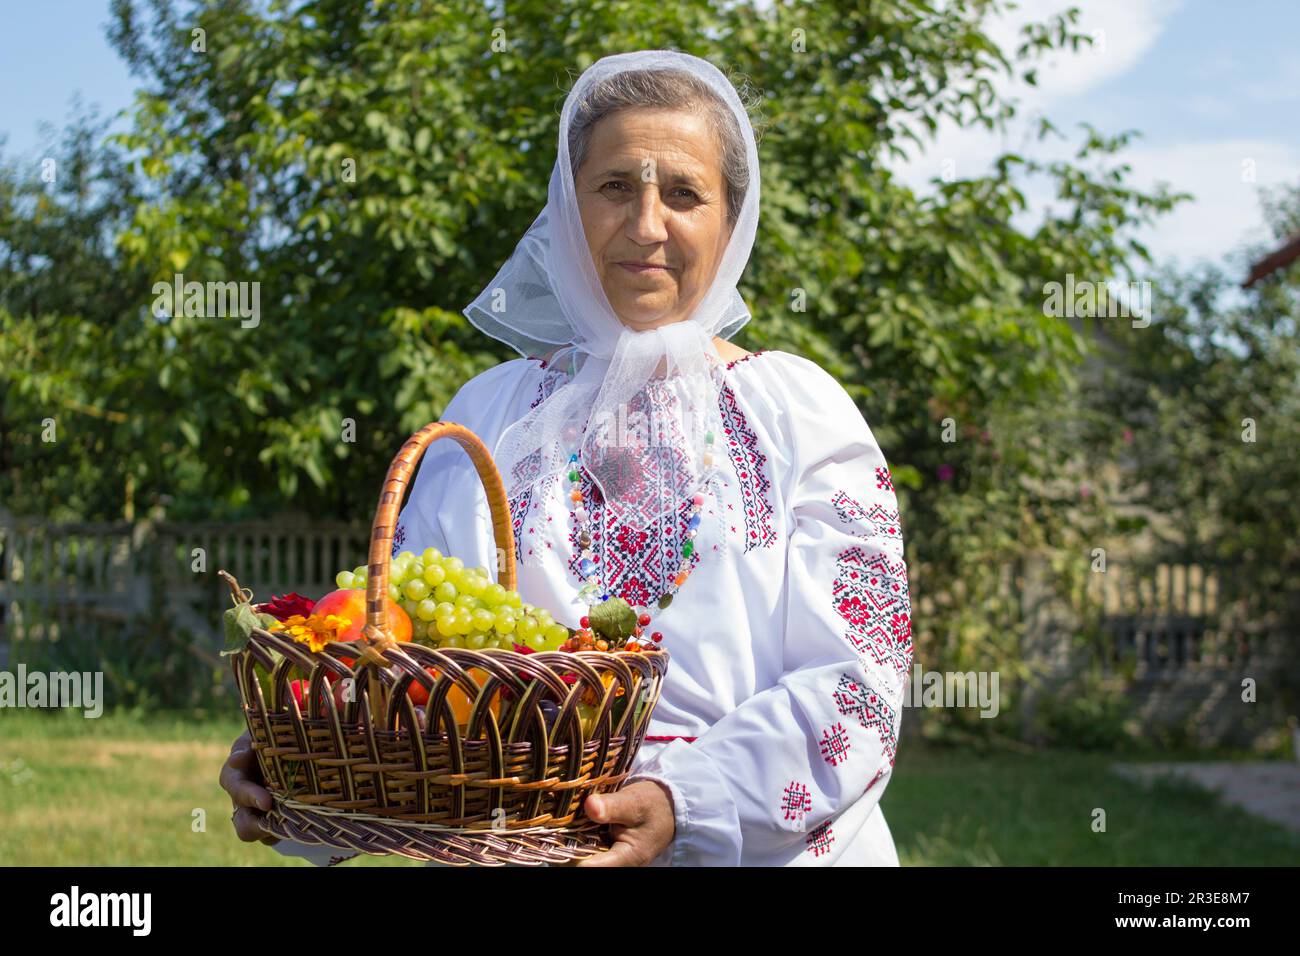 grandmother holds a full basket of fruits in an embroidered blouse Stock Photo